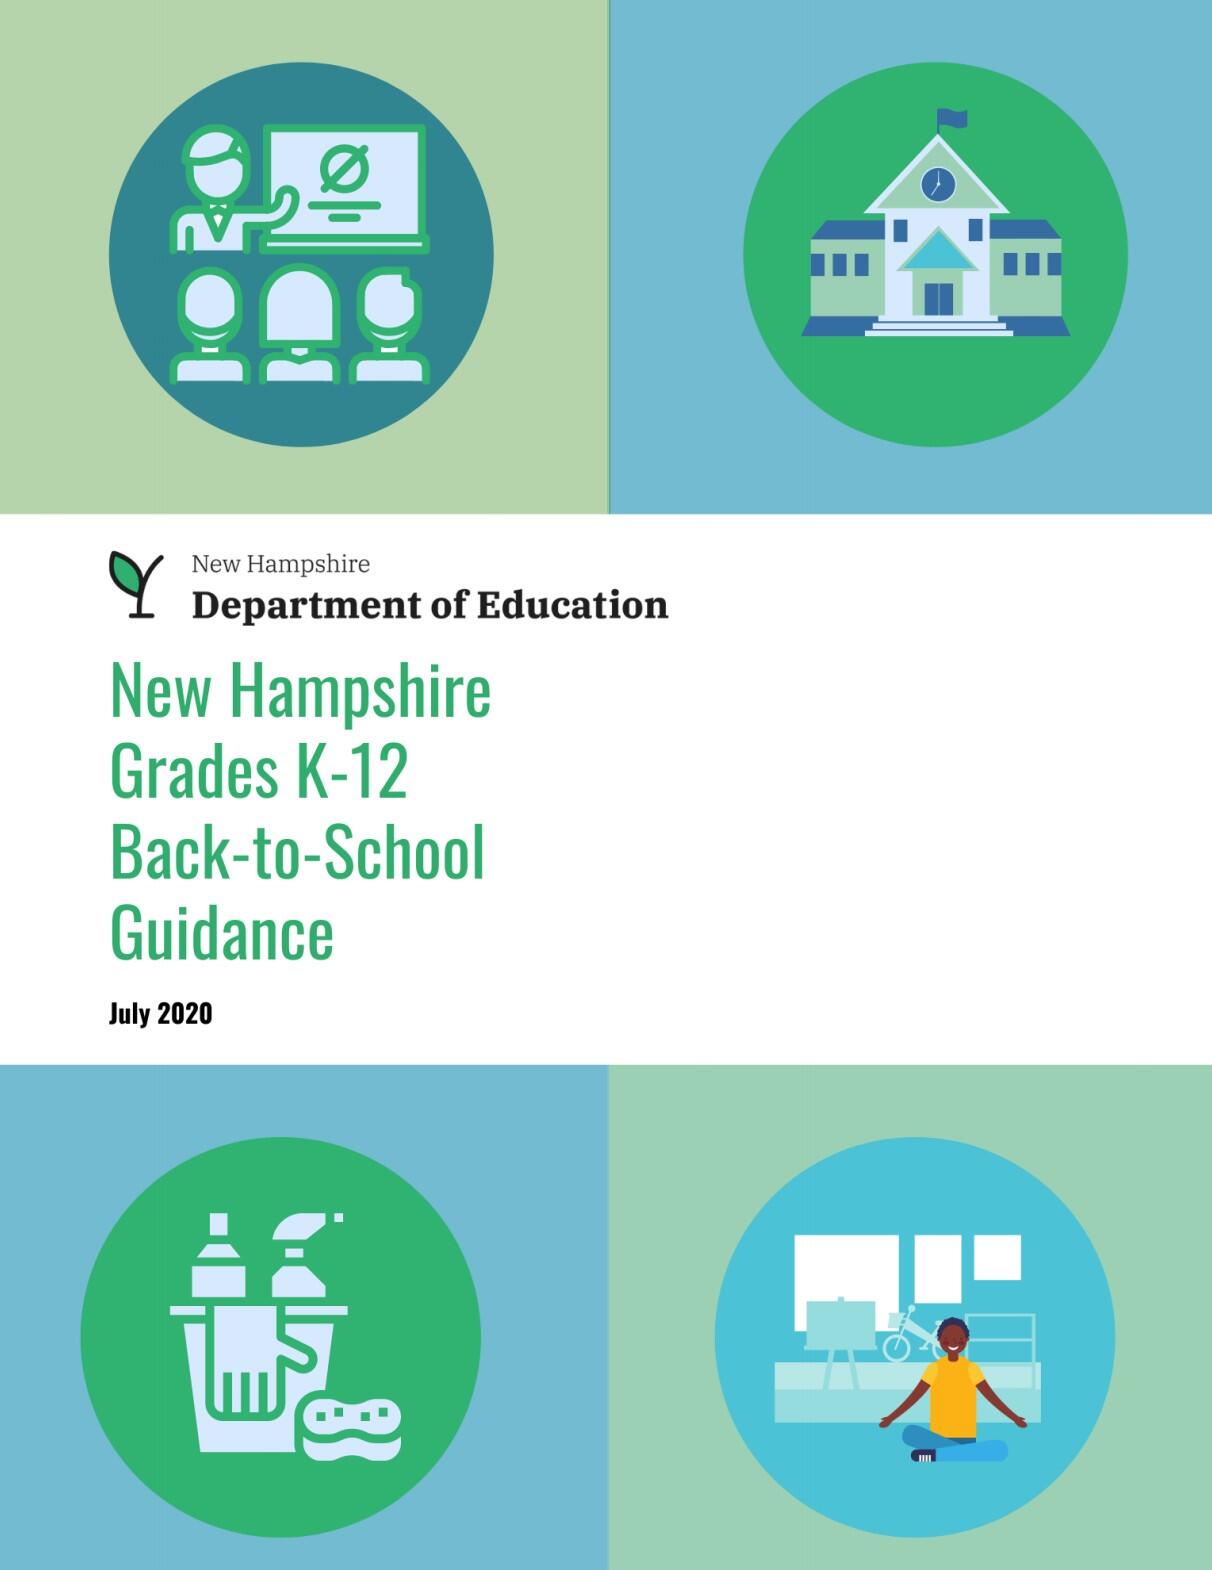 NH DOE Back-to-School Guidance booklet